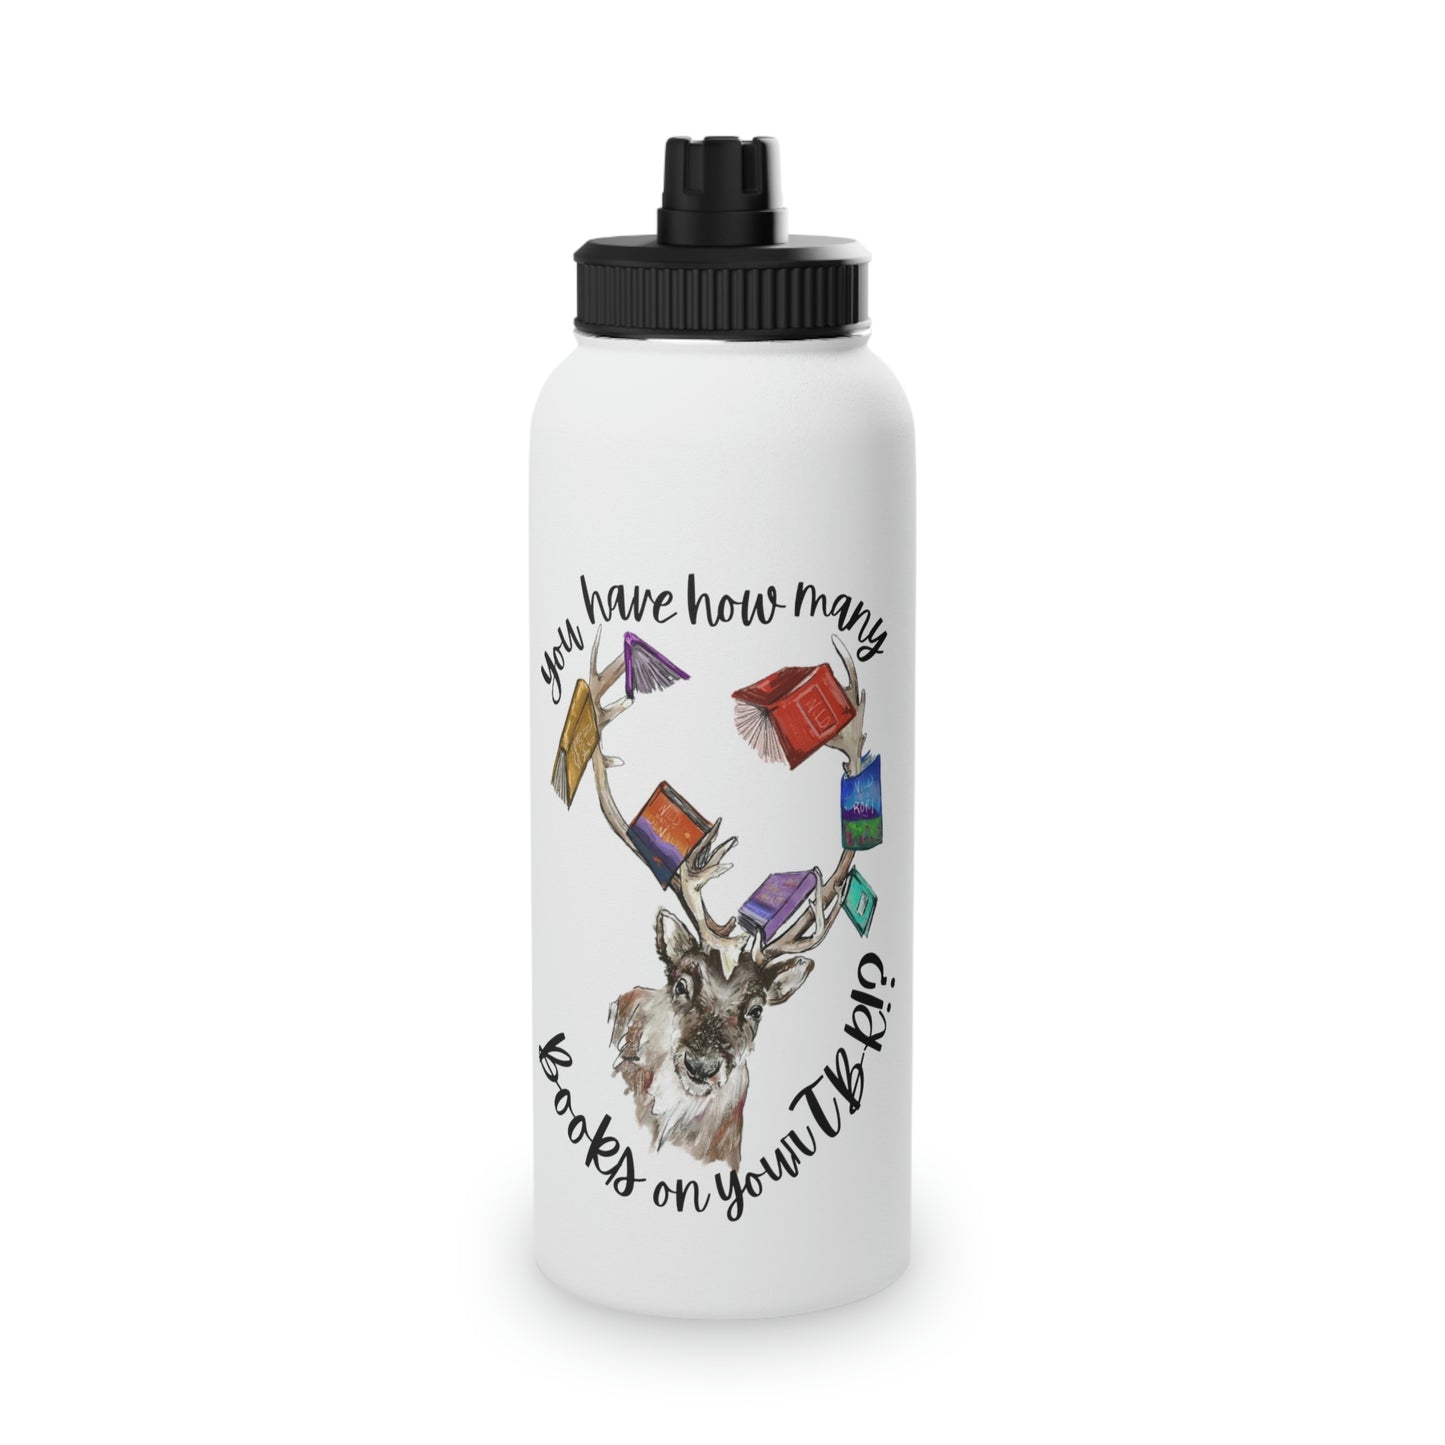 Caribou TBR Stainless Steel Water Bottle